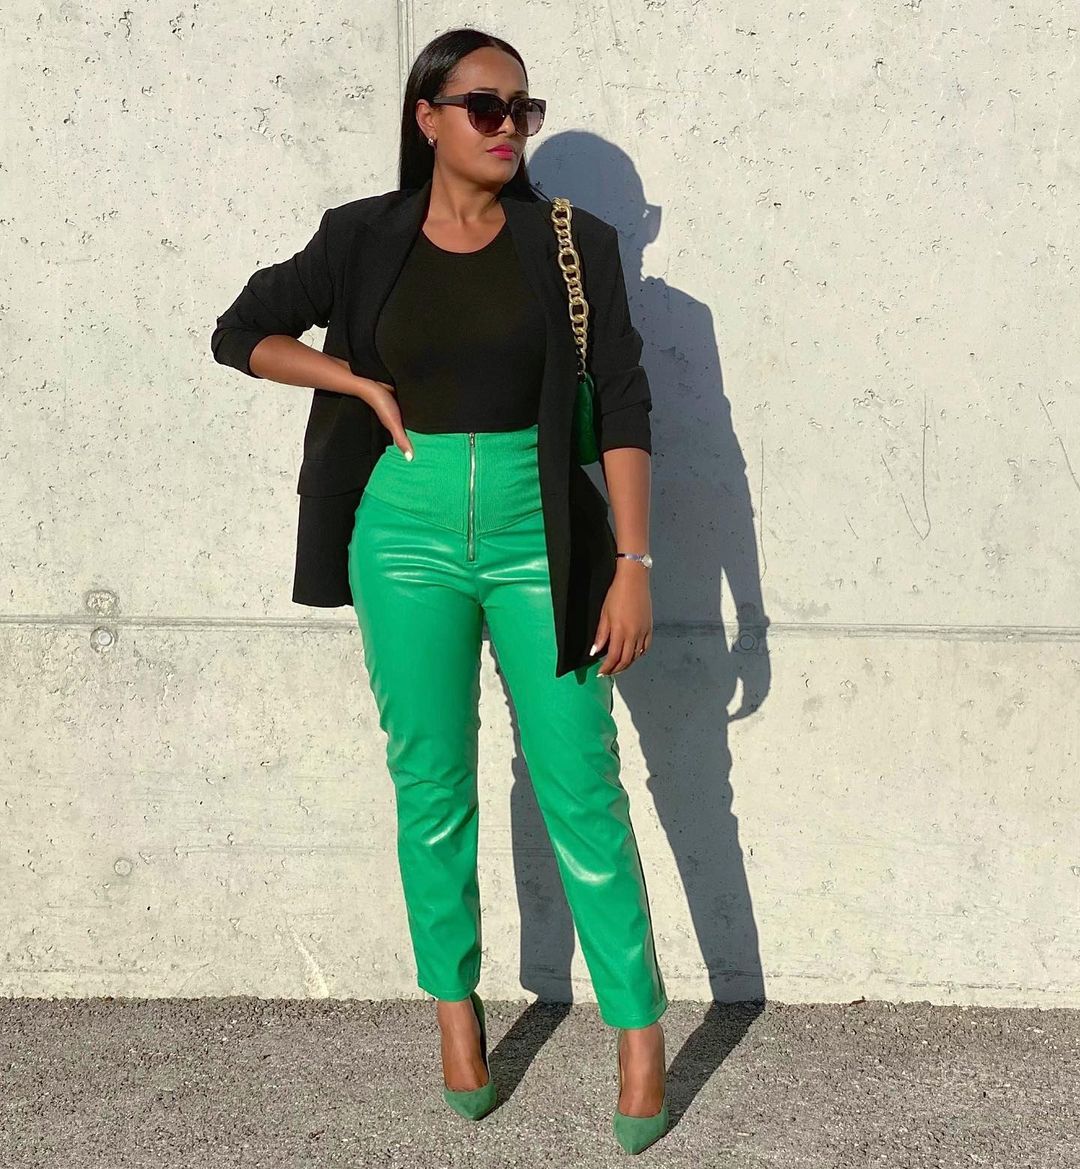 Check Out 6 Workwear Ideas That Are Both Smart And Chic | BN Style